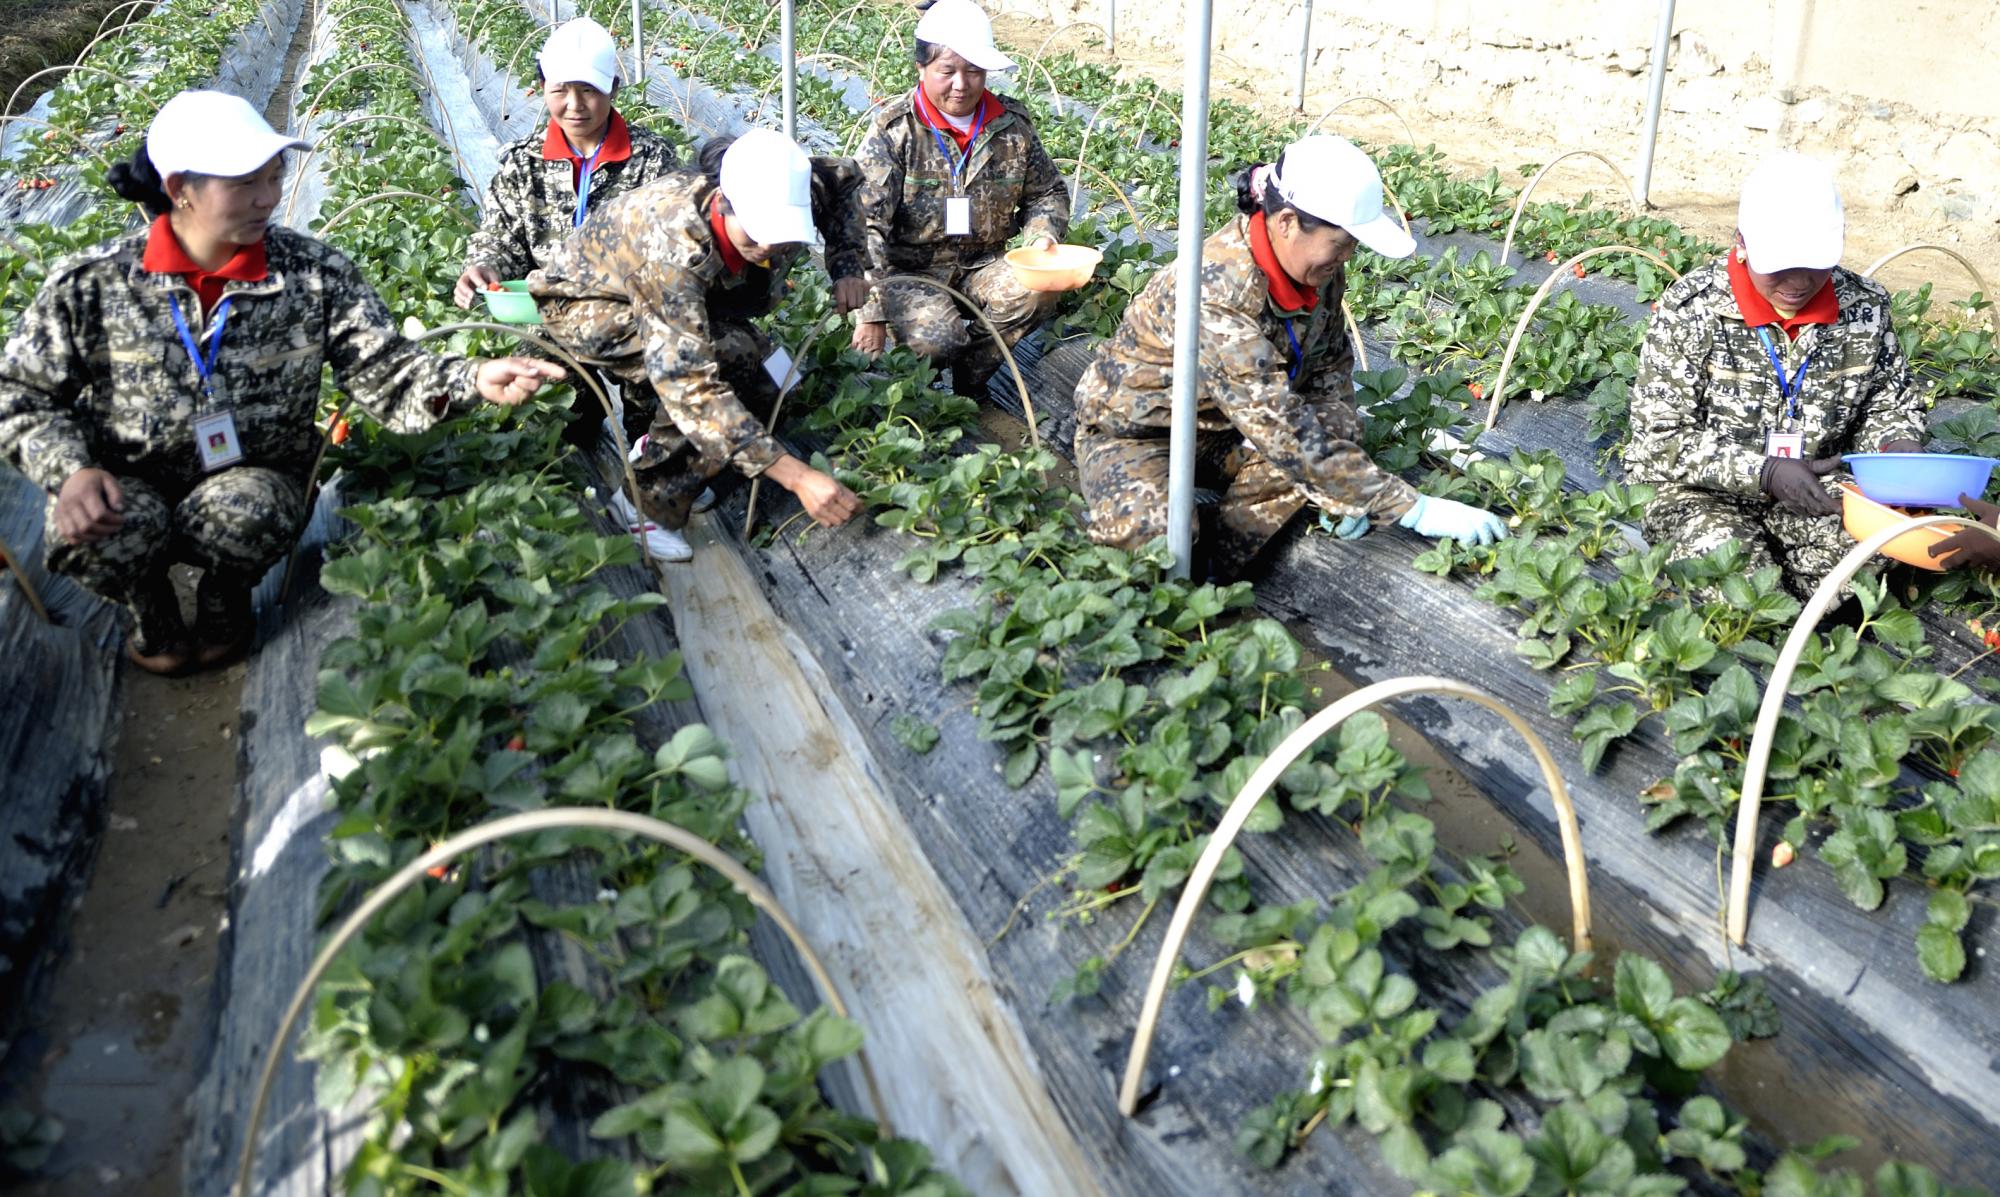 An activity of picking strawberry